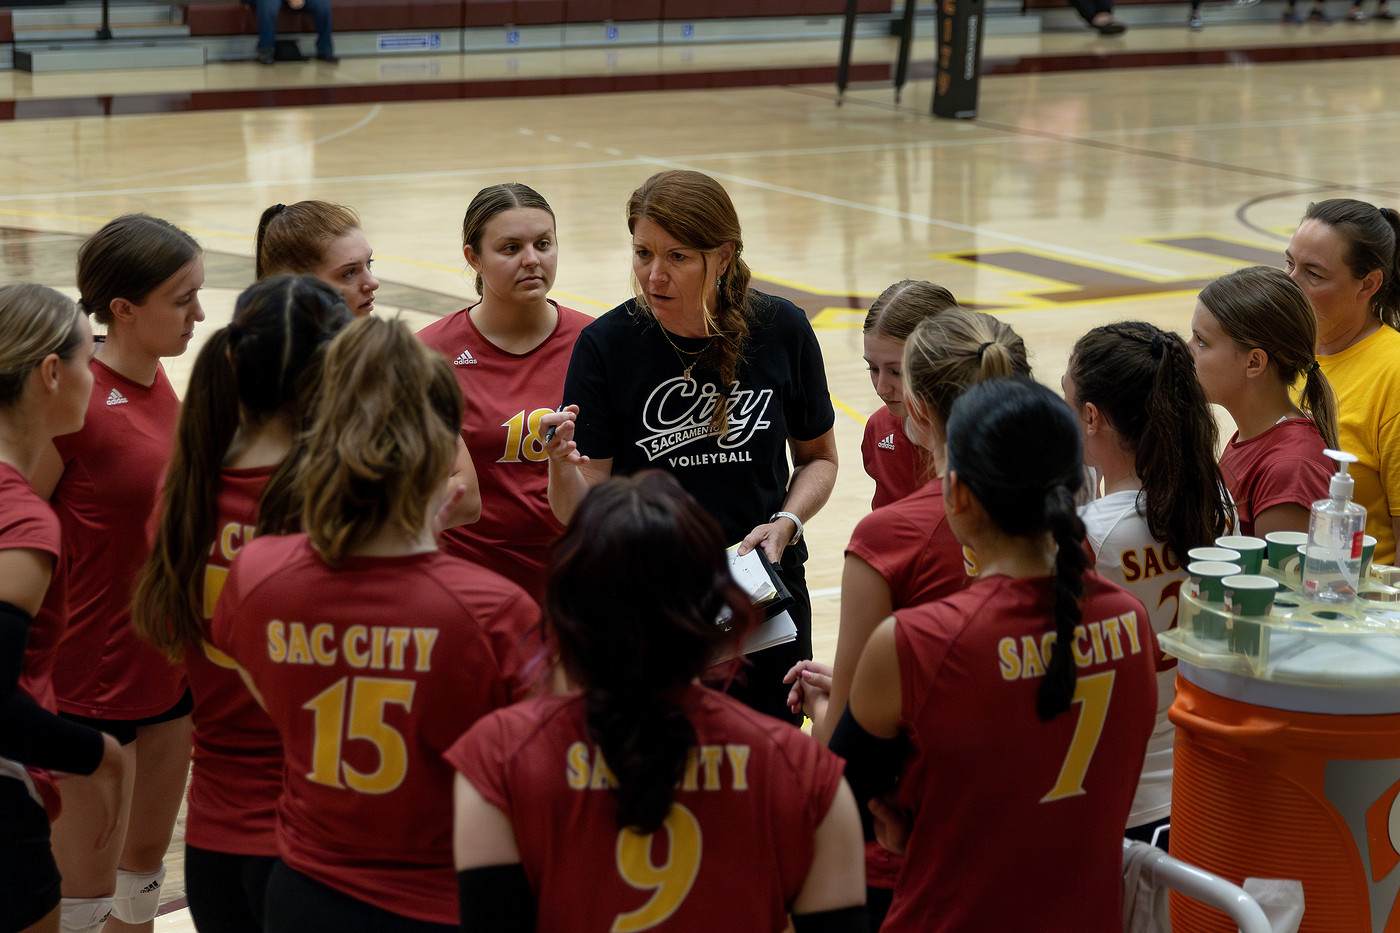 City drops their 3rd consecutive match against American River 3-0 (25-16, 25-12, 25-21)